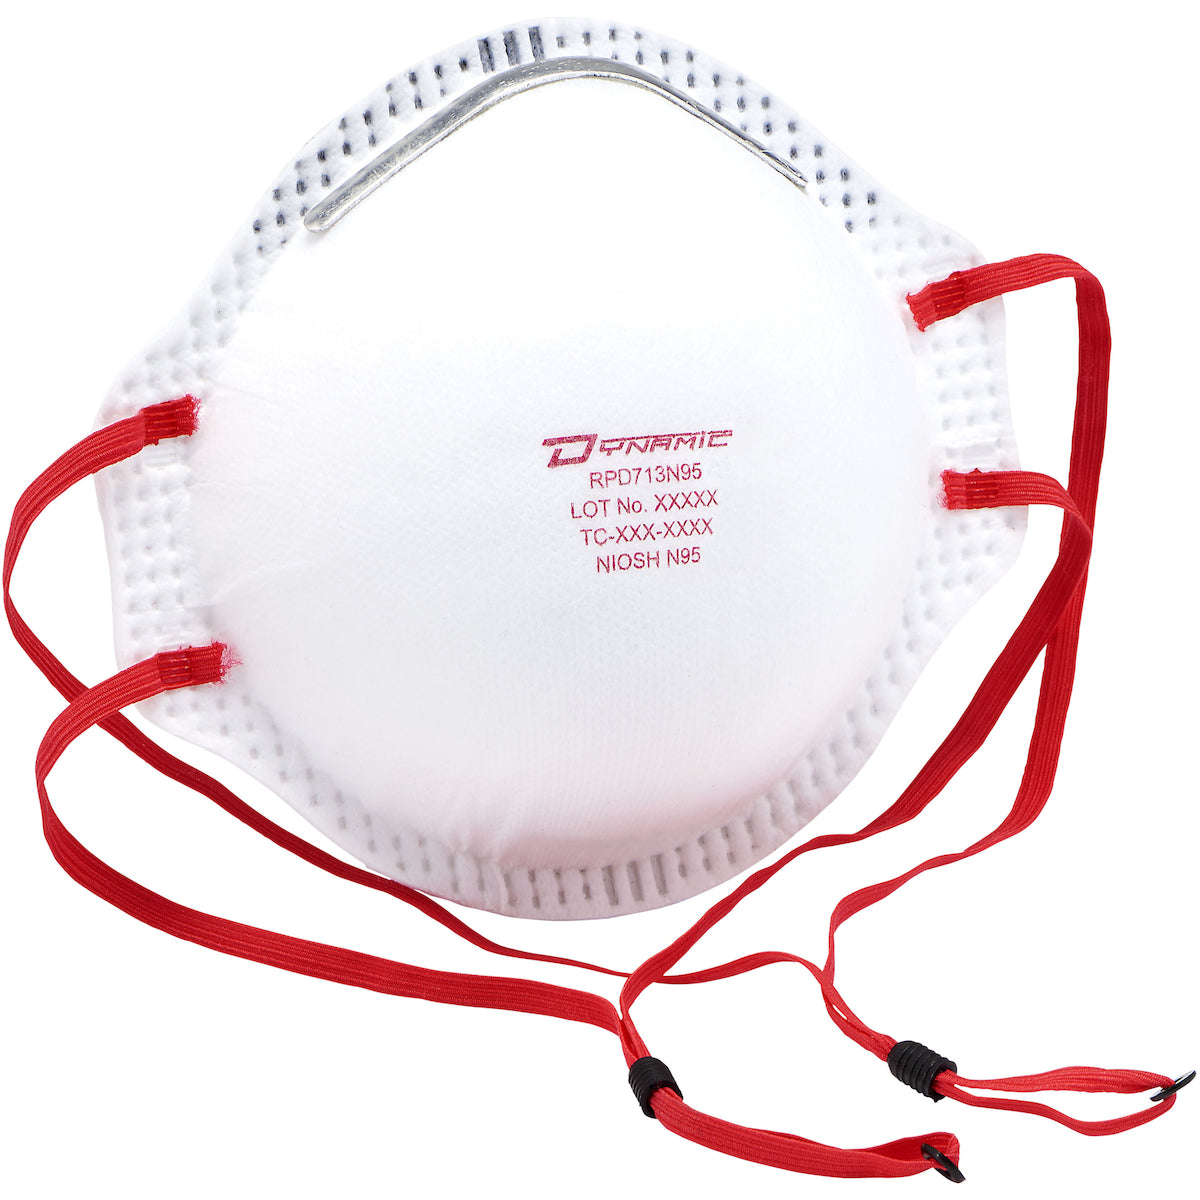 Dynamic 270-RPD713N95 Deluxe N95 Disposable Respirator - 20 Pack